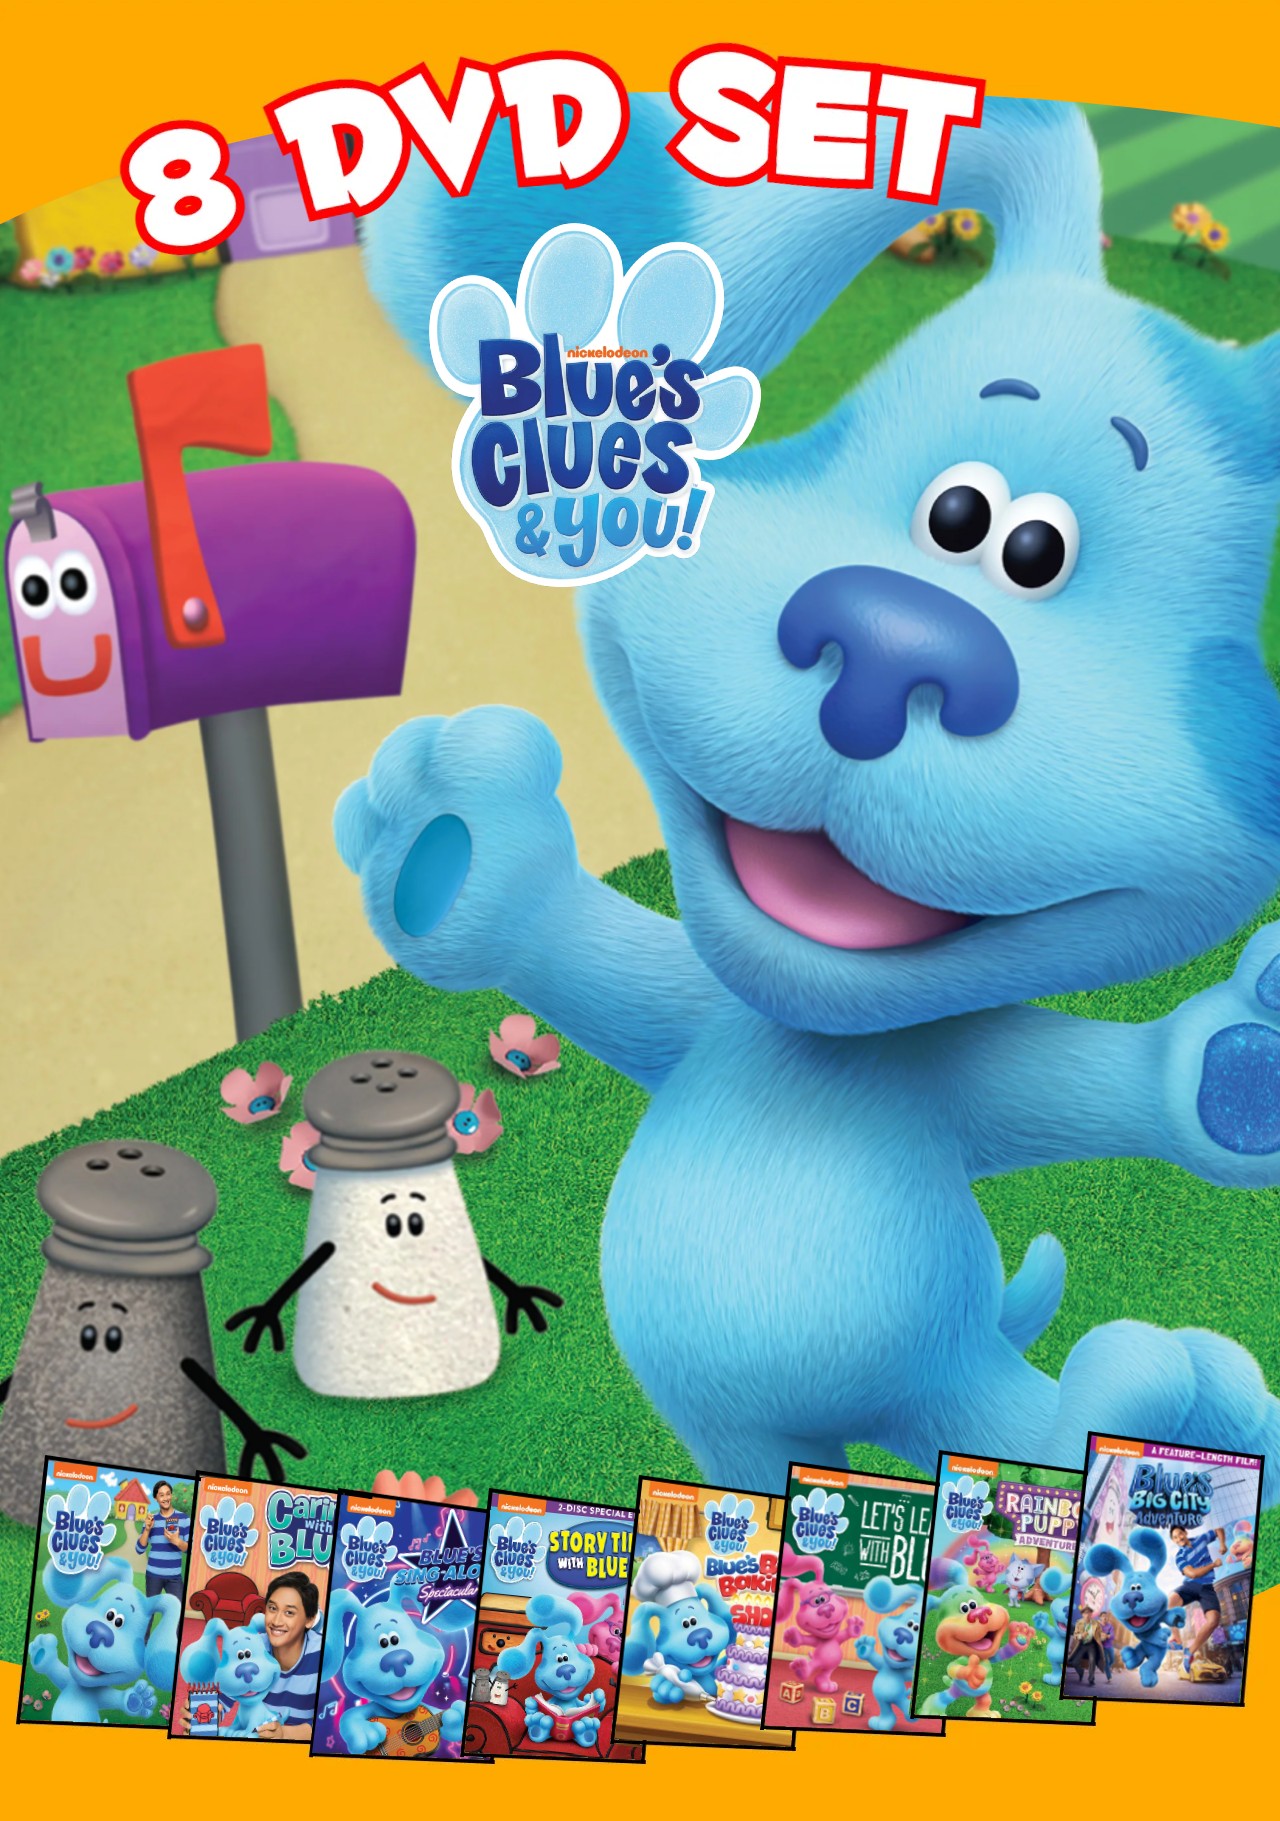 Blue's Clues and You! 8-DVD Set by Jack1set2 on DeviantArt